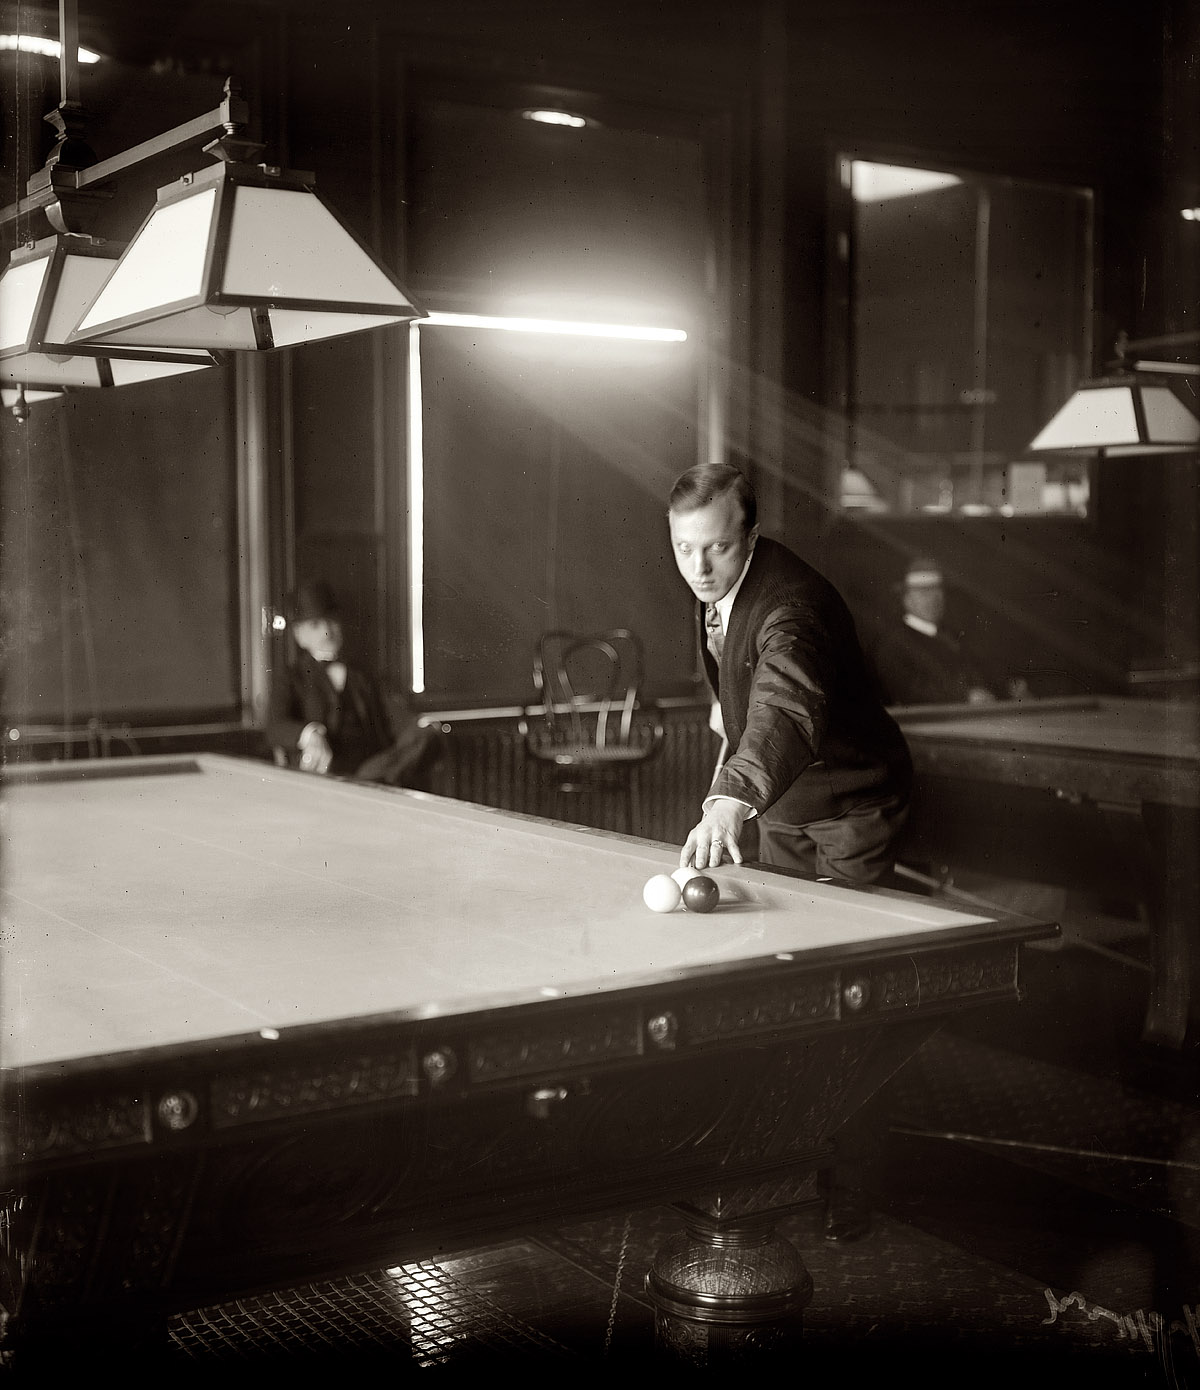 January 1909. Billiard champion Calvin Demarest in New York, seven years before his prematurely reported death. From his 1916 obituary, headlined "Calvin Demarest Dead -- Noted Billard Player Expires in Illinois Insane Asylum": CHICAGO, Feb. 22. Calvin S. Demarest, former amateur champion billiard player and later a professional, died at the Elgin Asylum for the Insane last night. Demarest suffered a nervous breakdown last June and attacked his wife with a knife. She was saved from serious injury by Demarest's mother. The billiardist was taken for treatment to a rest cure, but failed to improve and was removed to the asylum. As it turned out, Calvin was very much alive. In 1925, though, he died before his time. View full size. George Grantham Bain Collection.